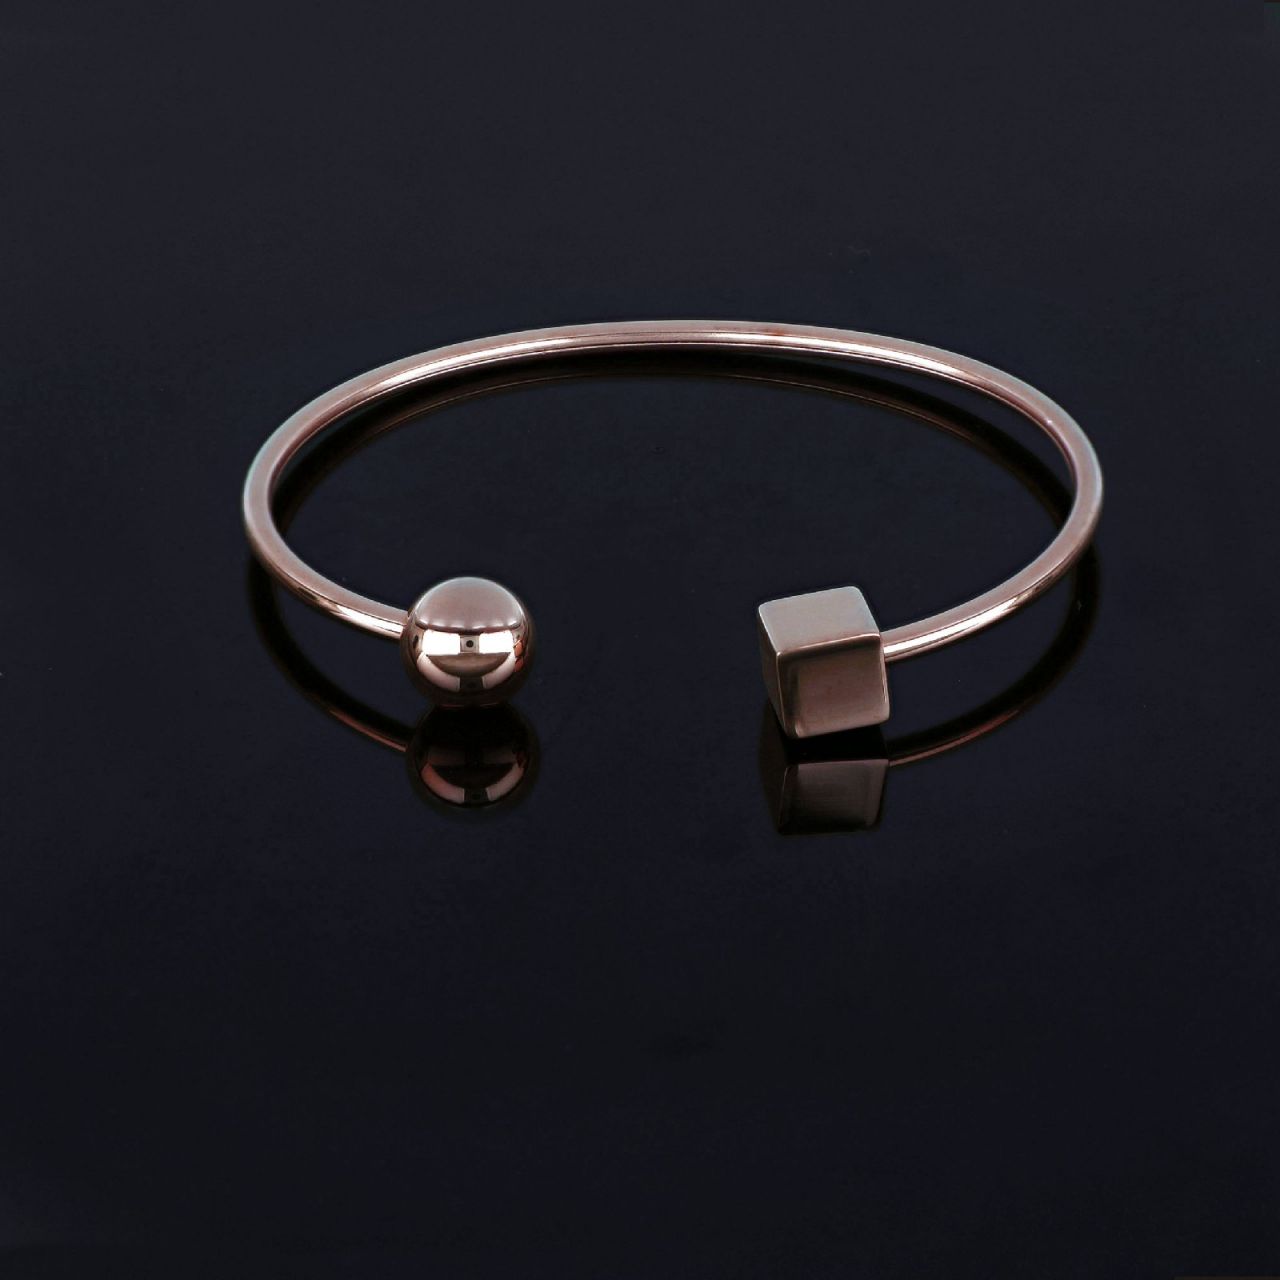 Stainless steel bangle rose gold geometric shapes BR12021-03 ...